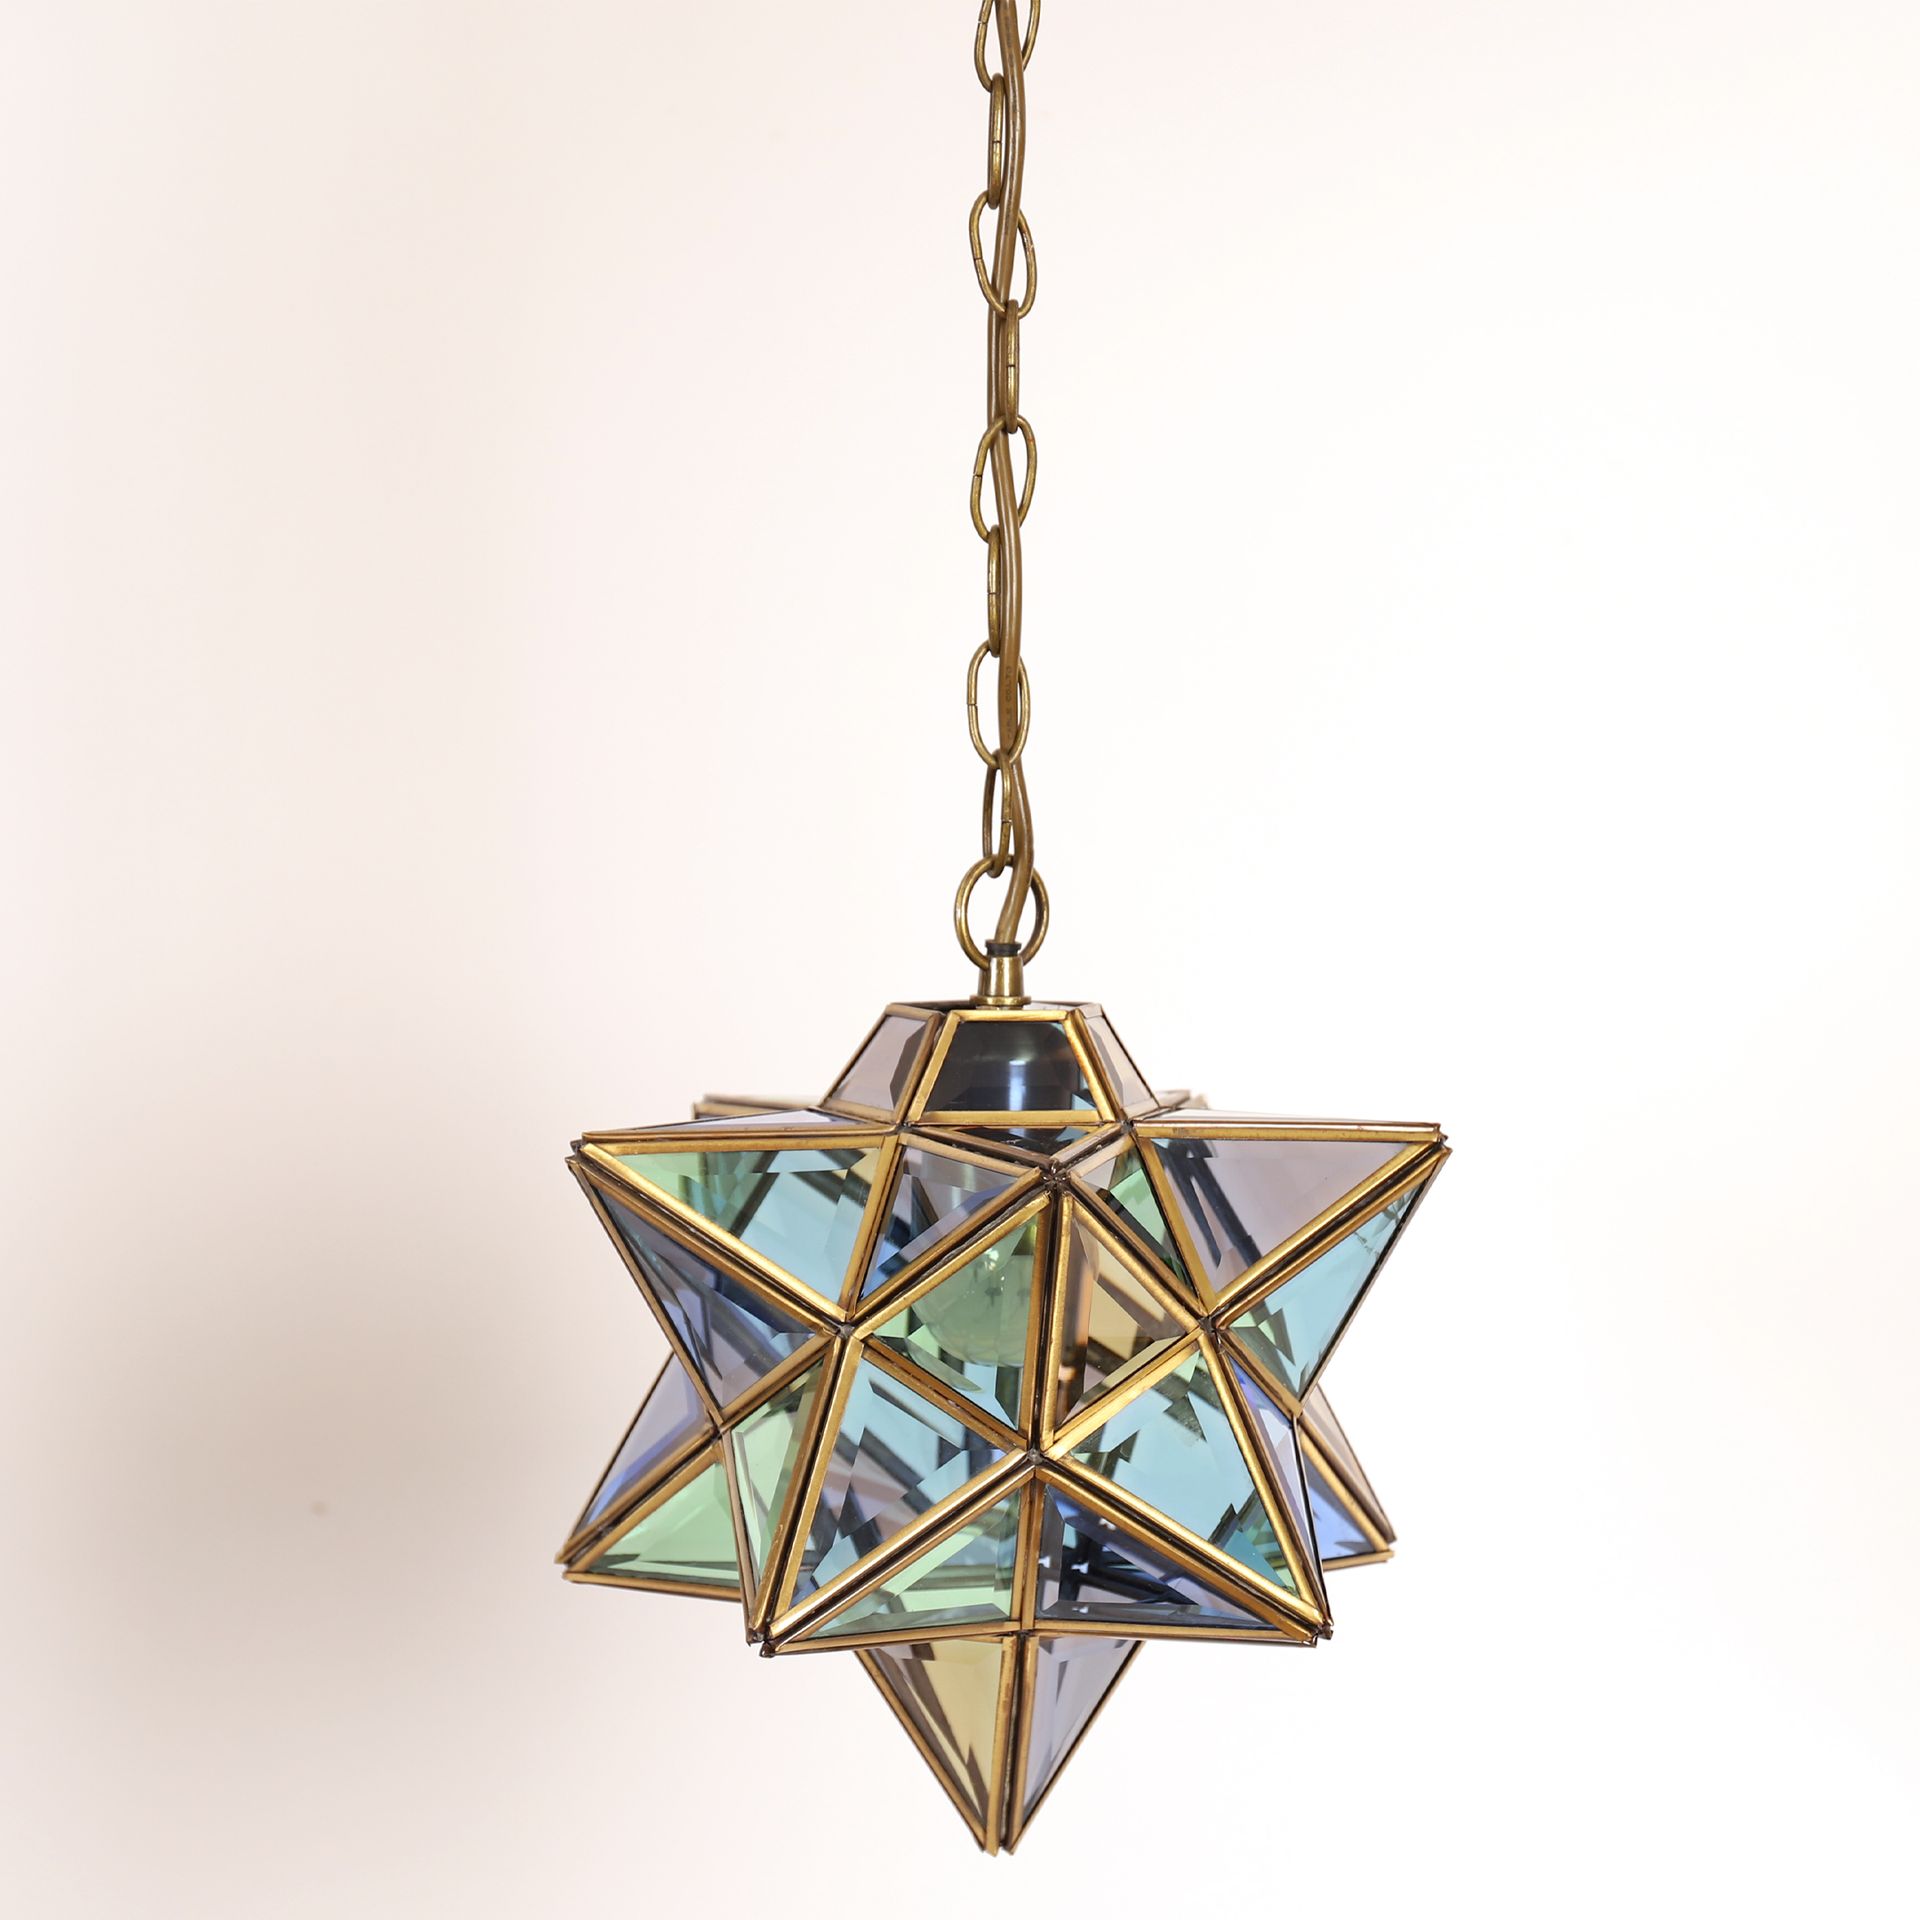 Null STAR SUSPENSION IN COLORED GLASS

H: 30 cm approx.

Small accident